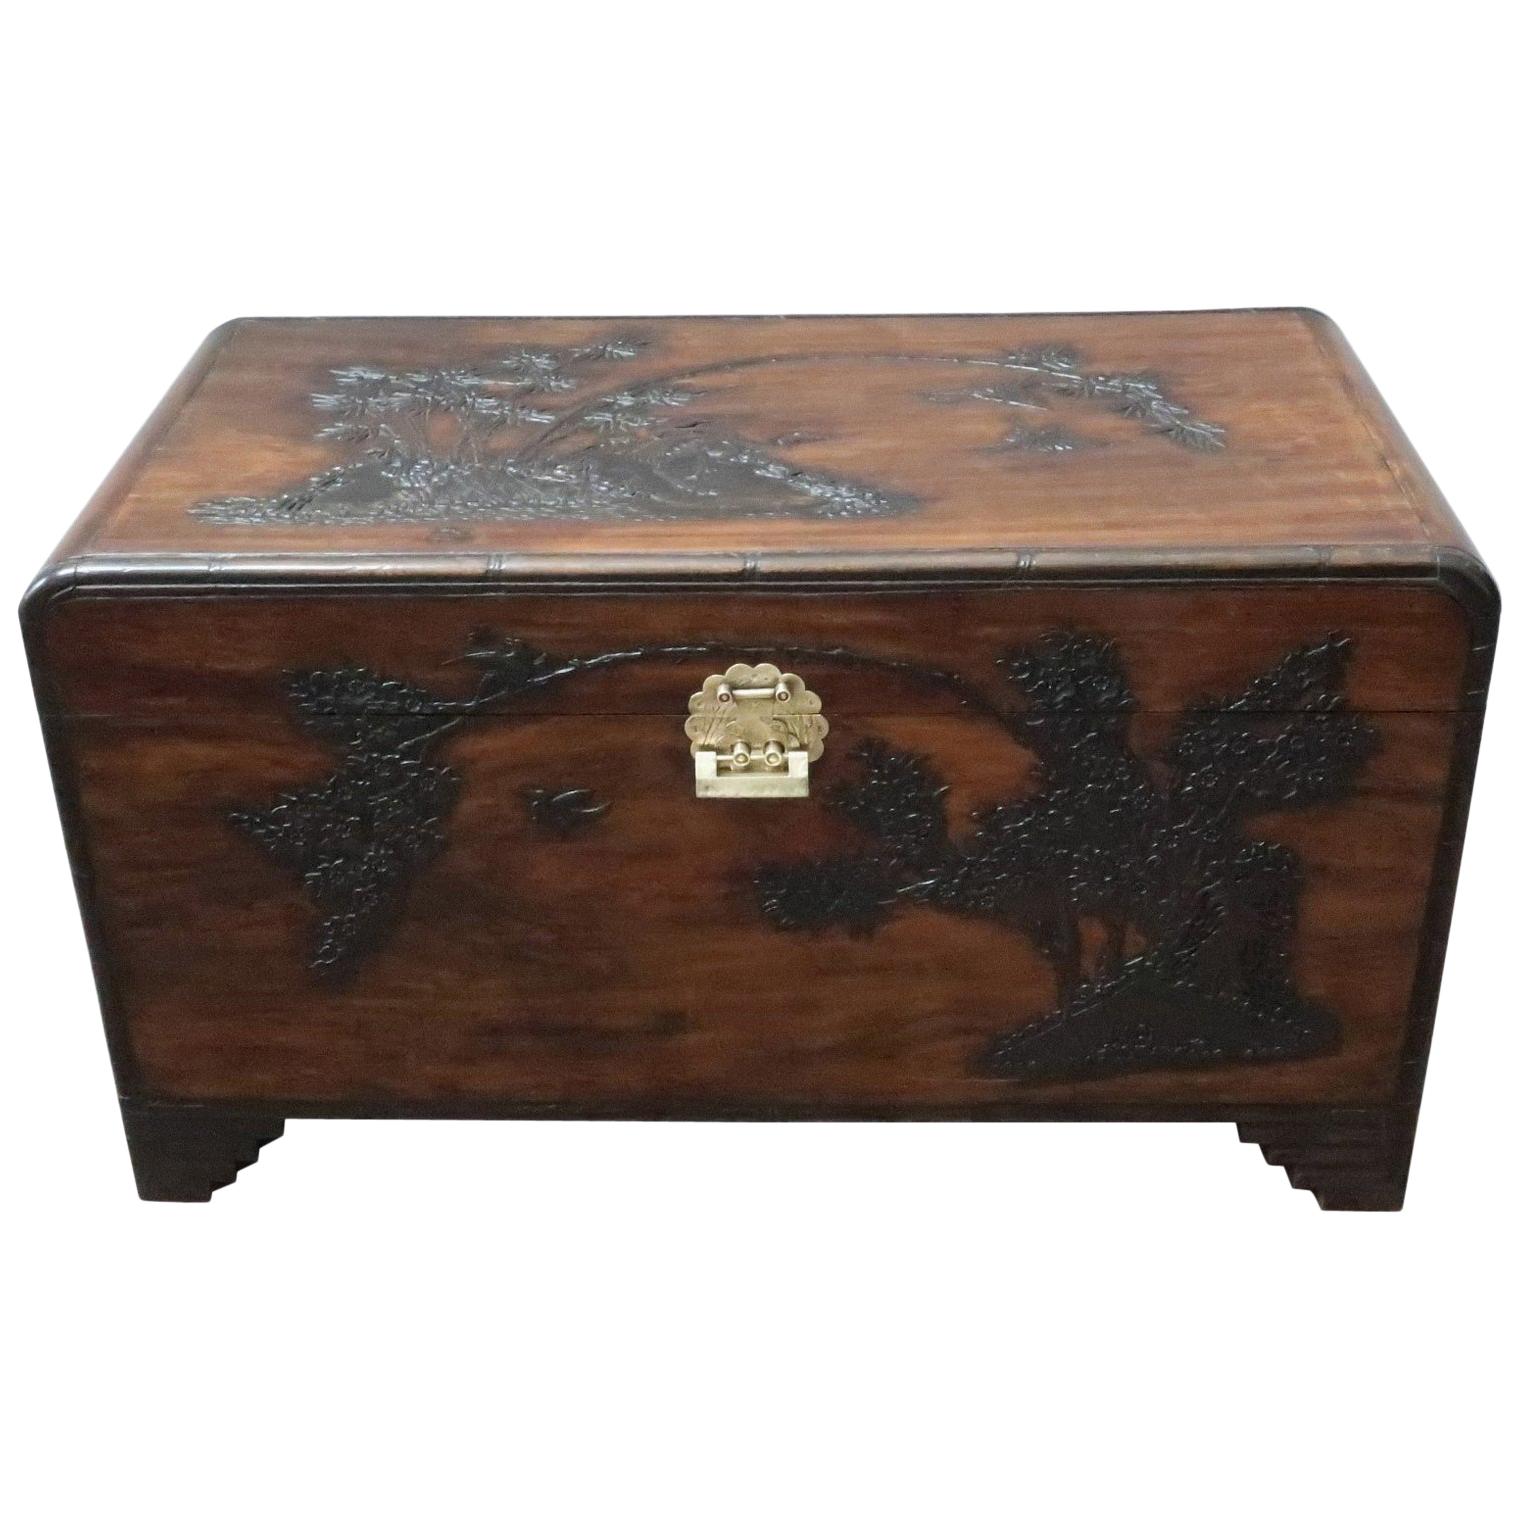 Oriental Early 20th Century Freestanding Carved Camphor Wood Chest